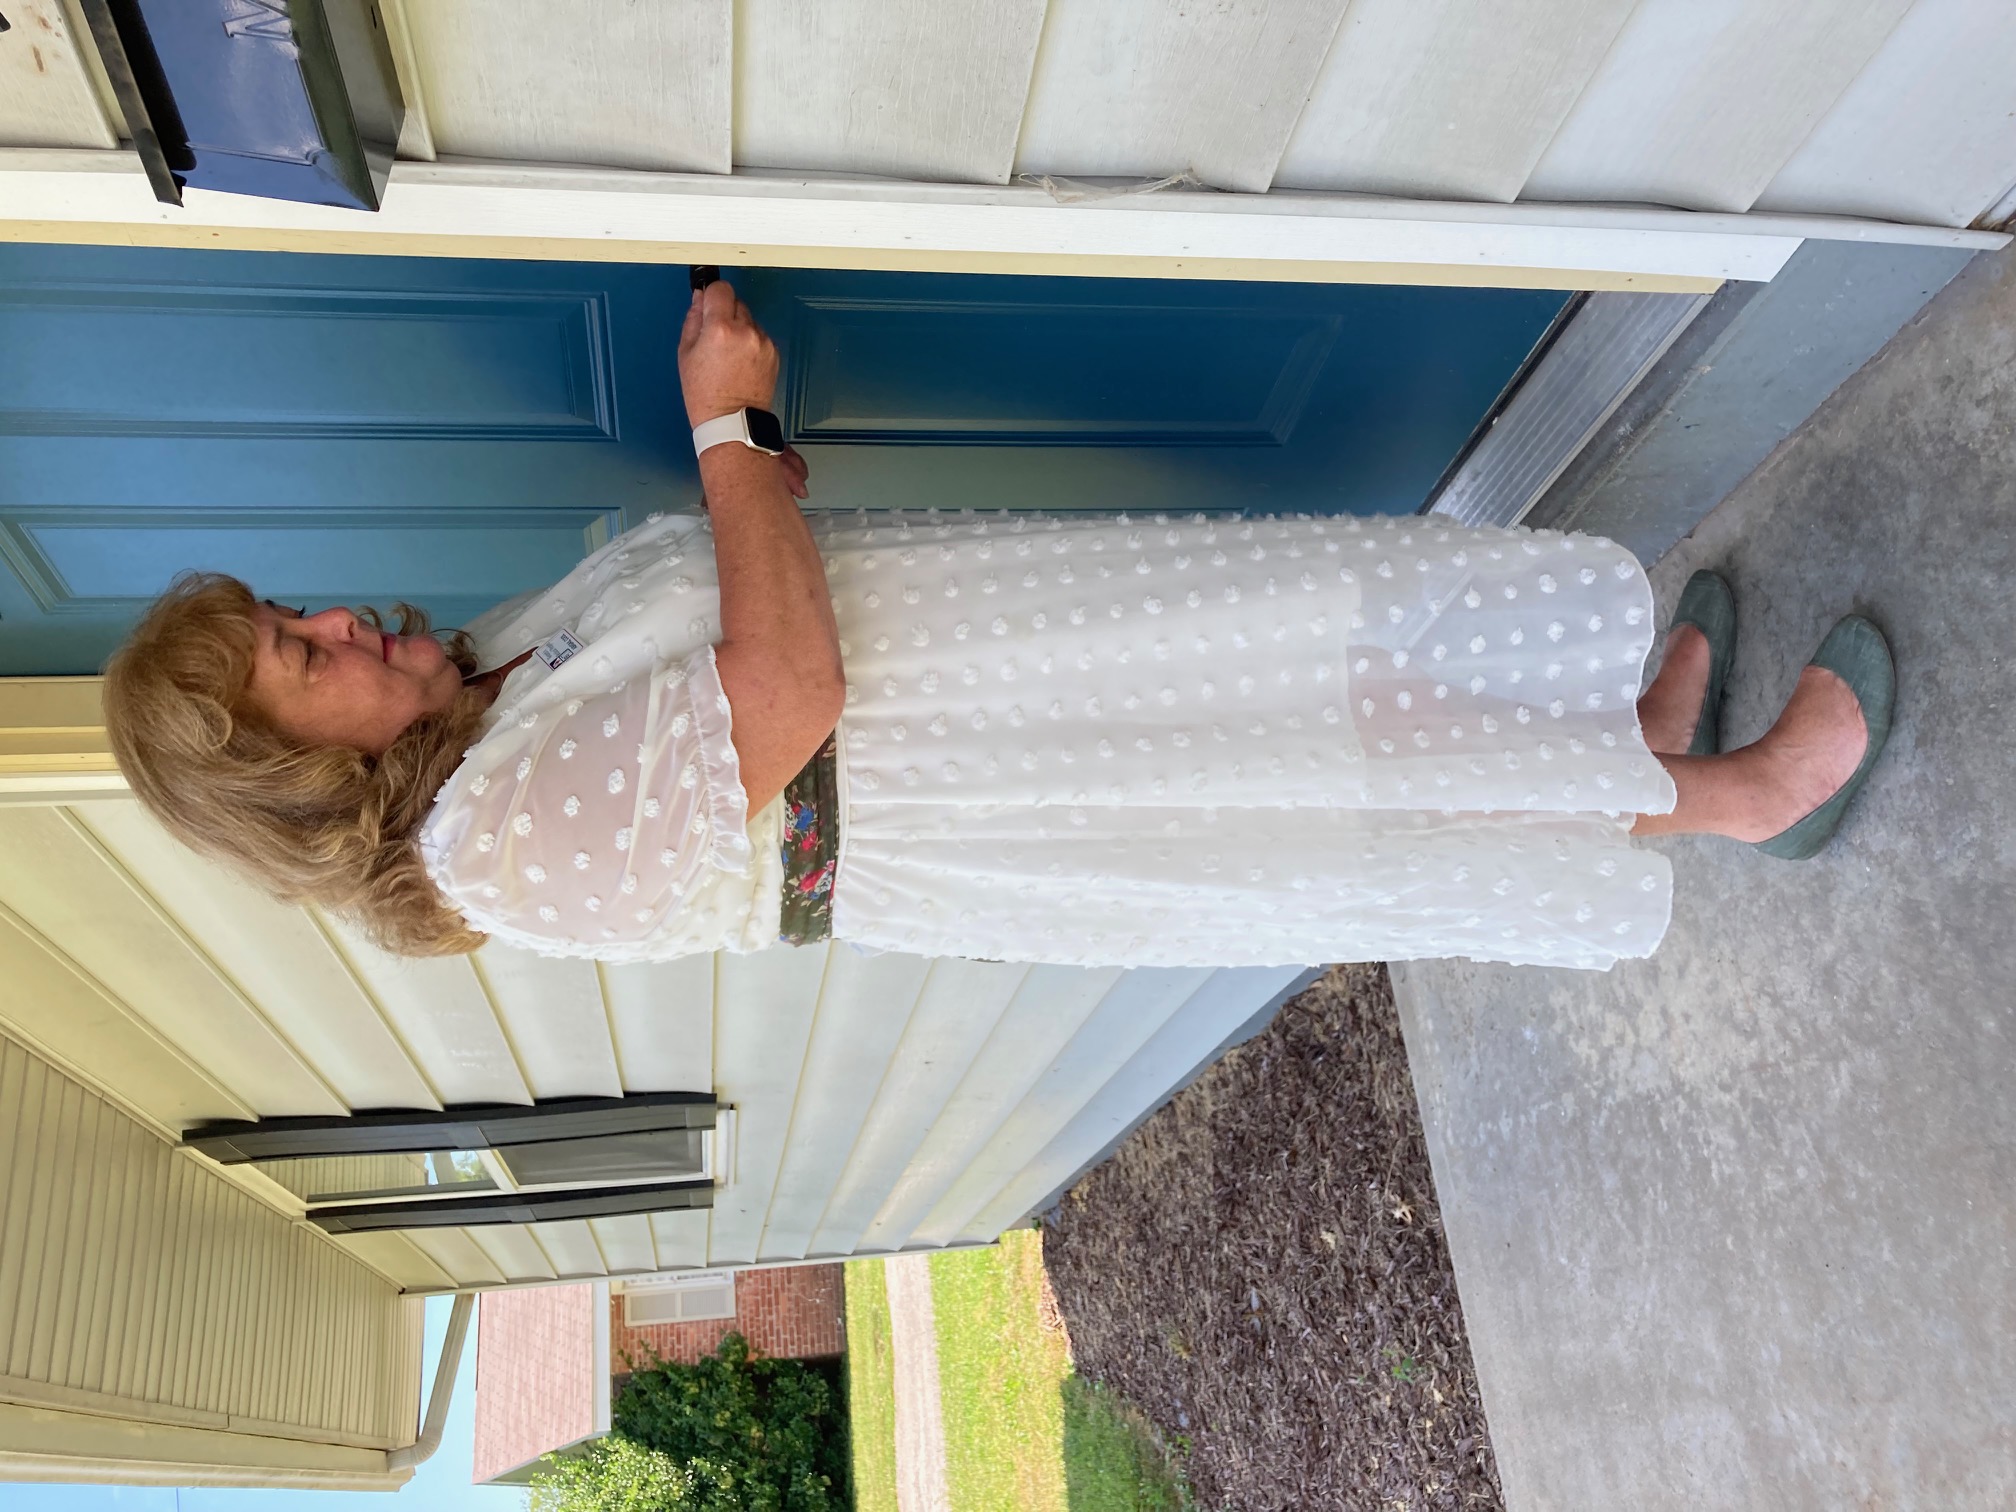 Abigail Cool, executive director of the Women's Medical Respite, unlocks the front door of the program's new home.